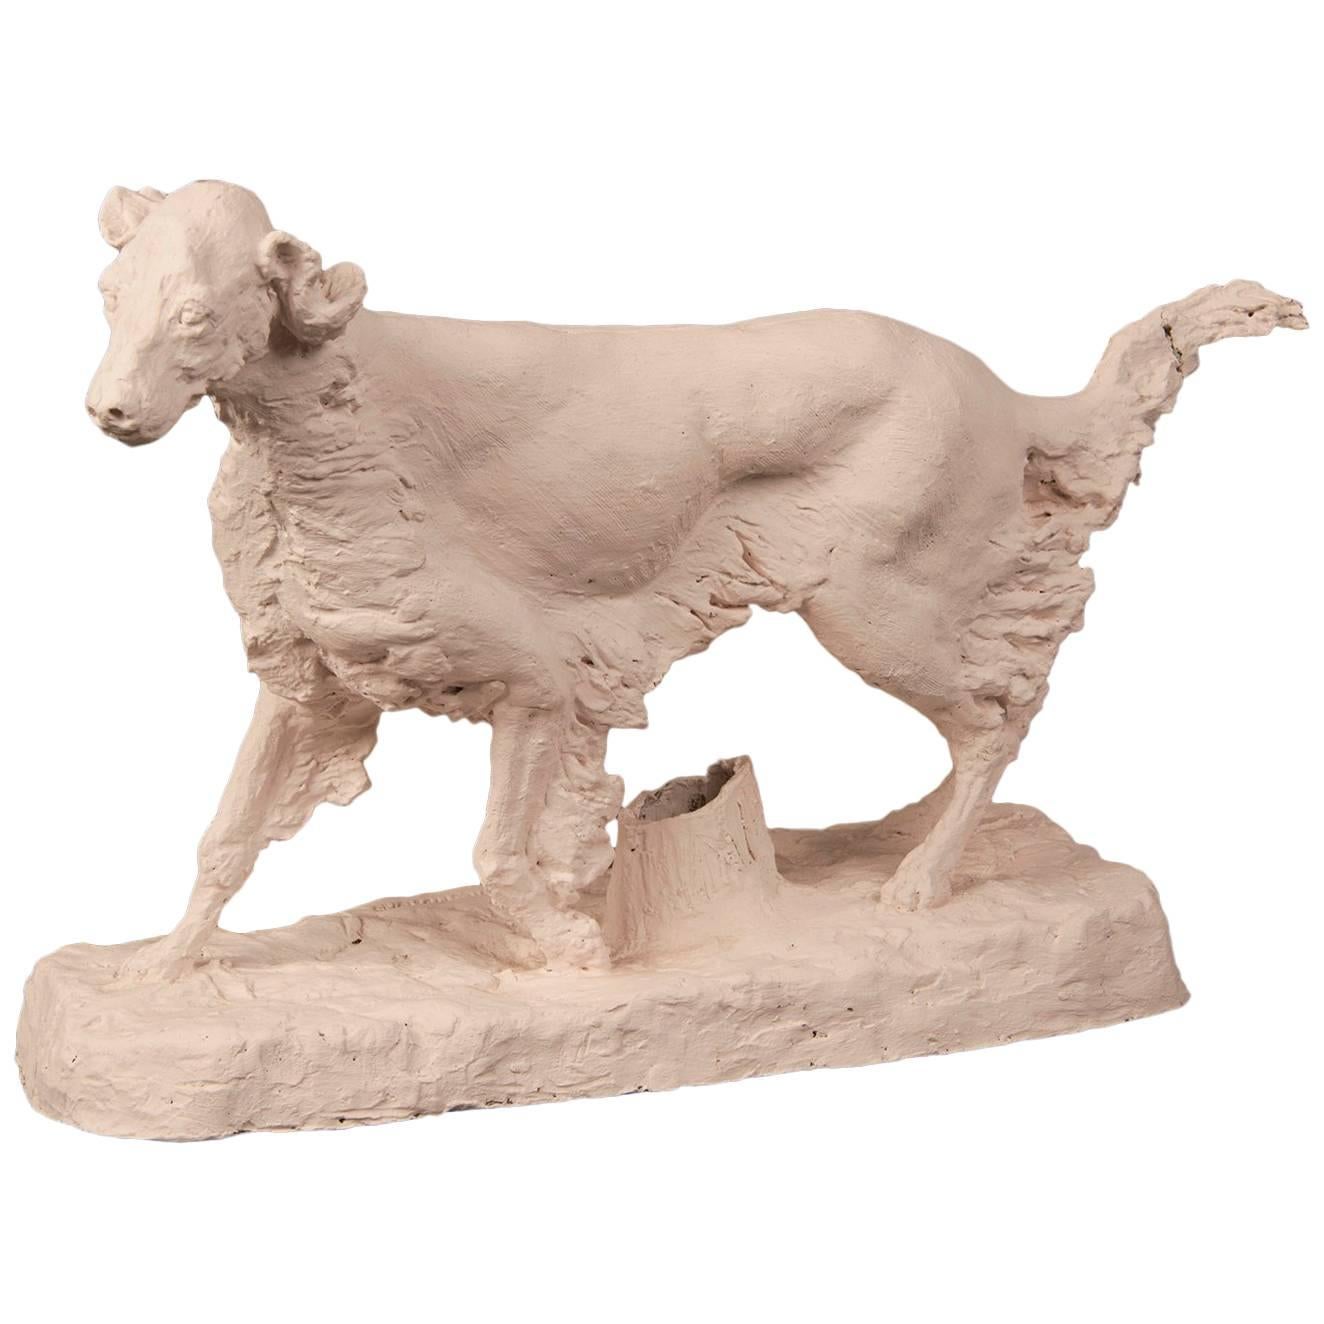 Vintage French Sculpture Maquette of a Hunting Dog